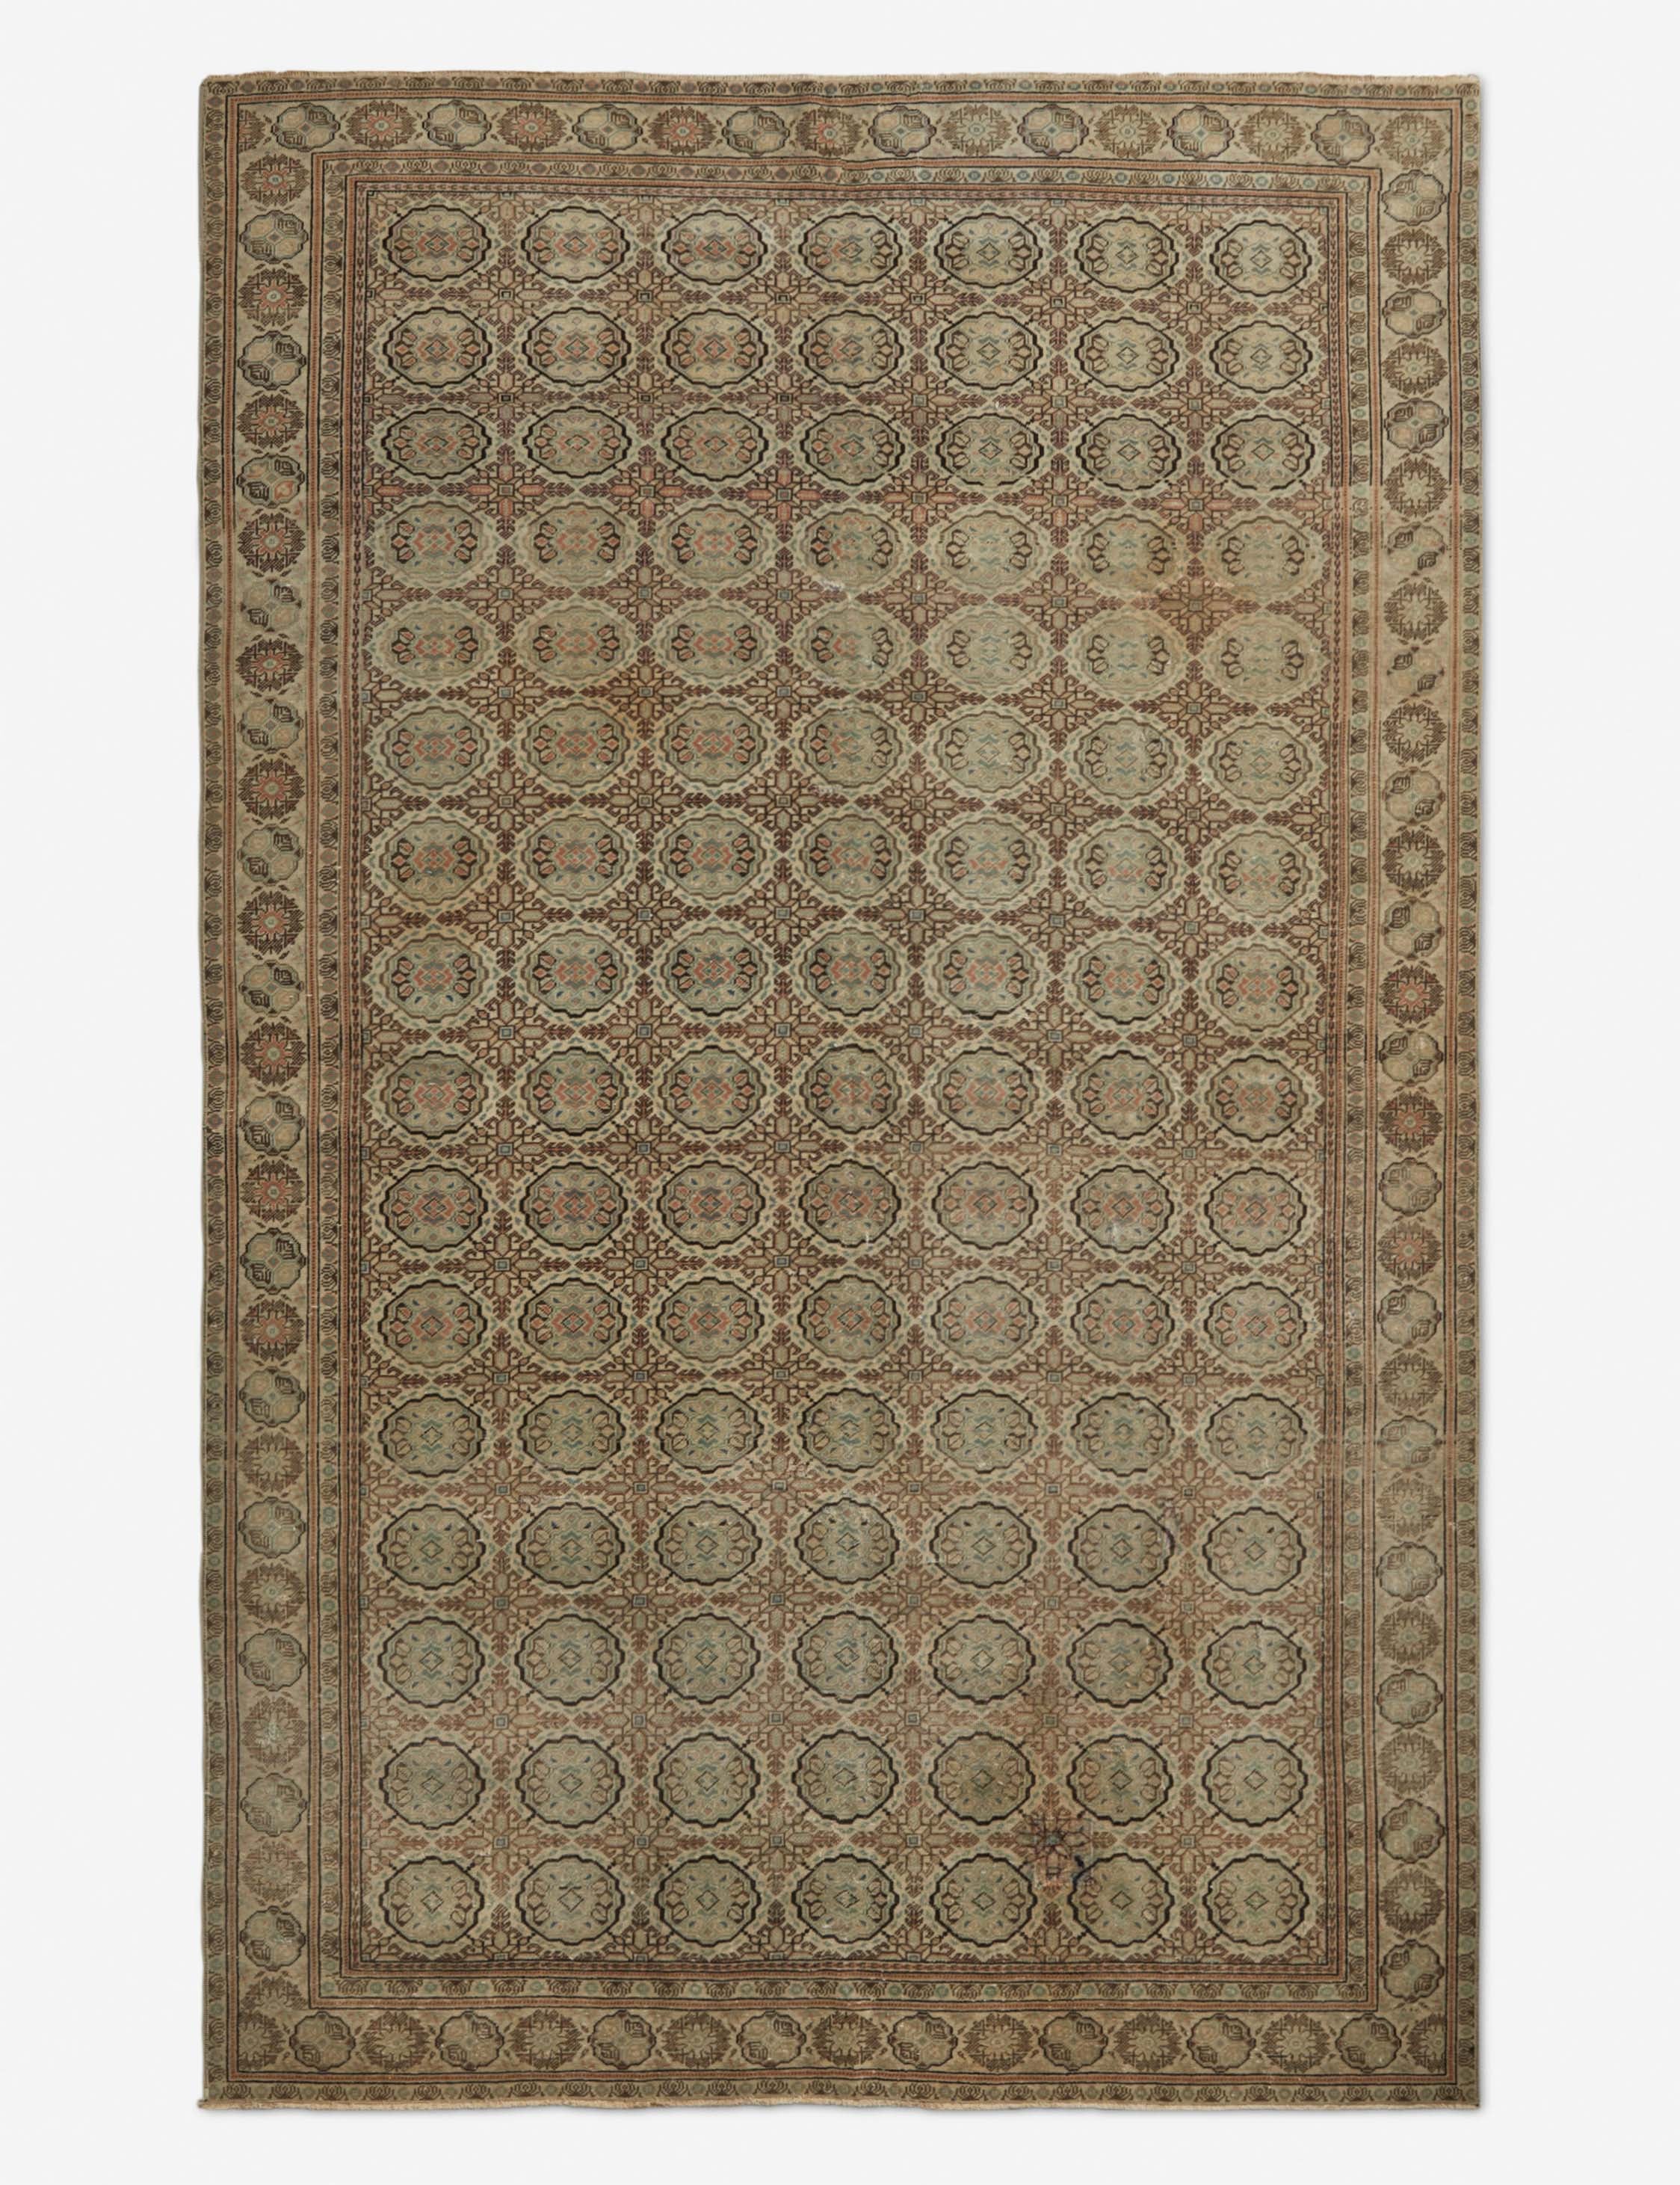 Vintage Turkish Hand-Knotted Wool Rug No. 169, 6'1